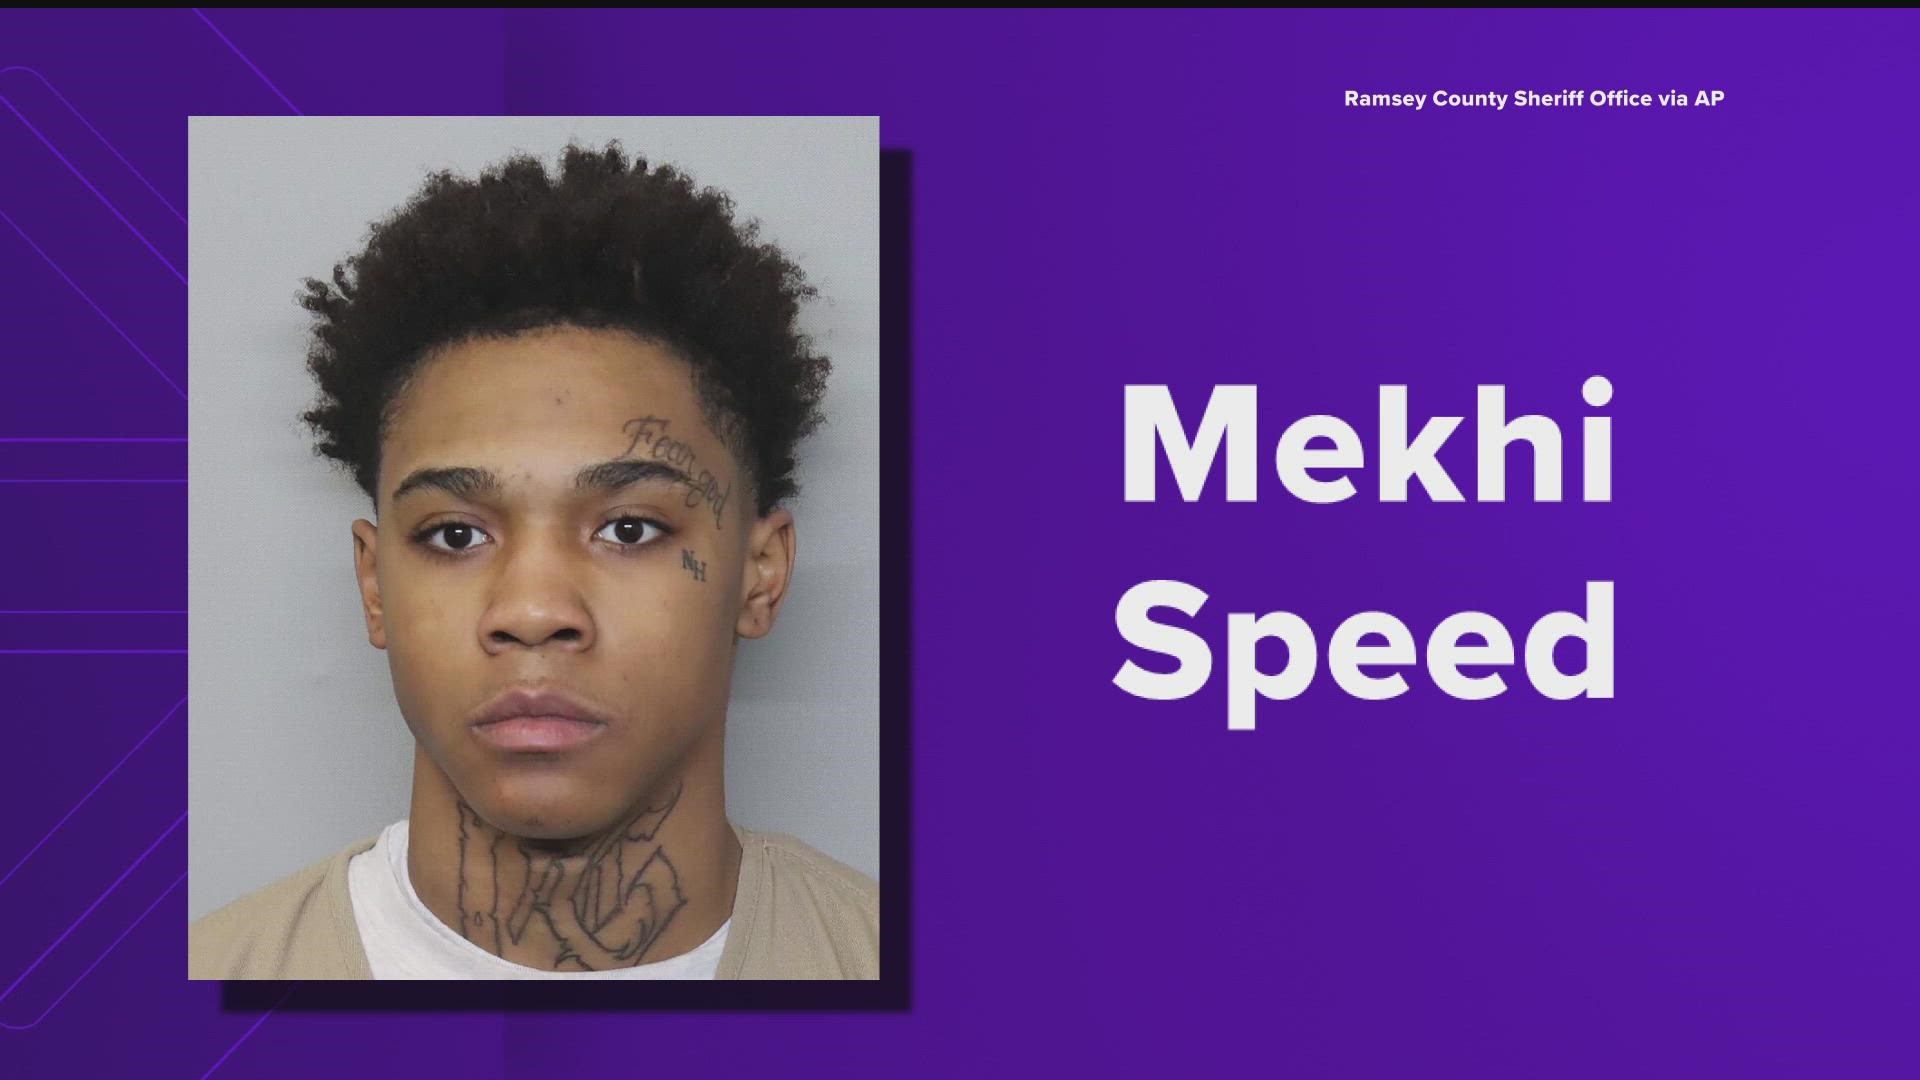 Mekhi Speed is now 18 but was 17 years old when he admittedly shot and killed Otis Elder while making a drug deal in St. Paul on the night of January 10, 2022.